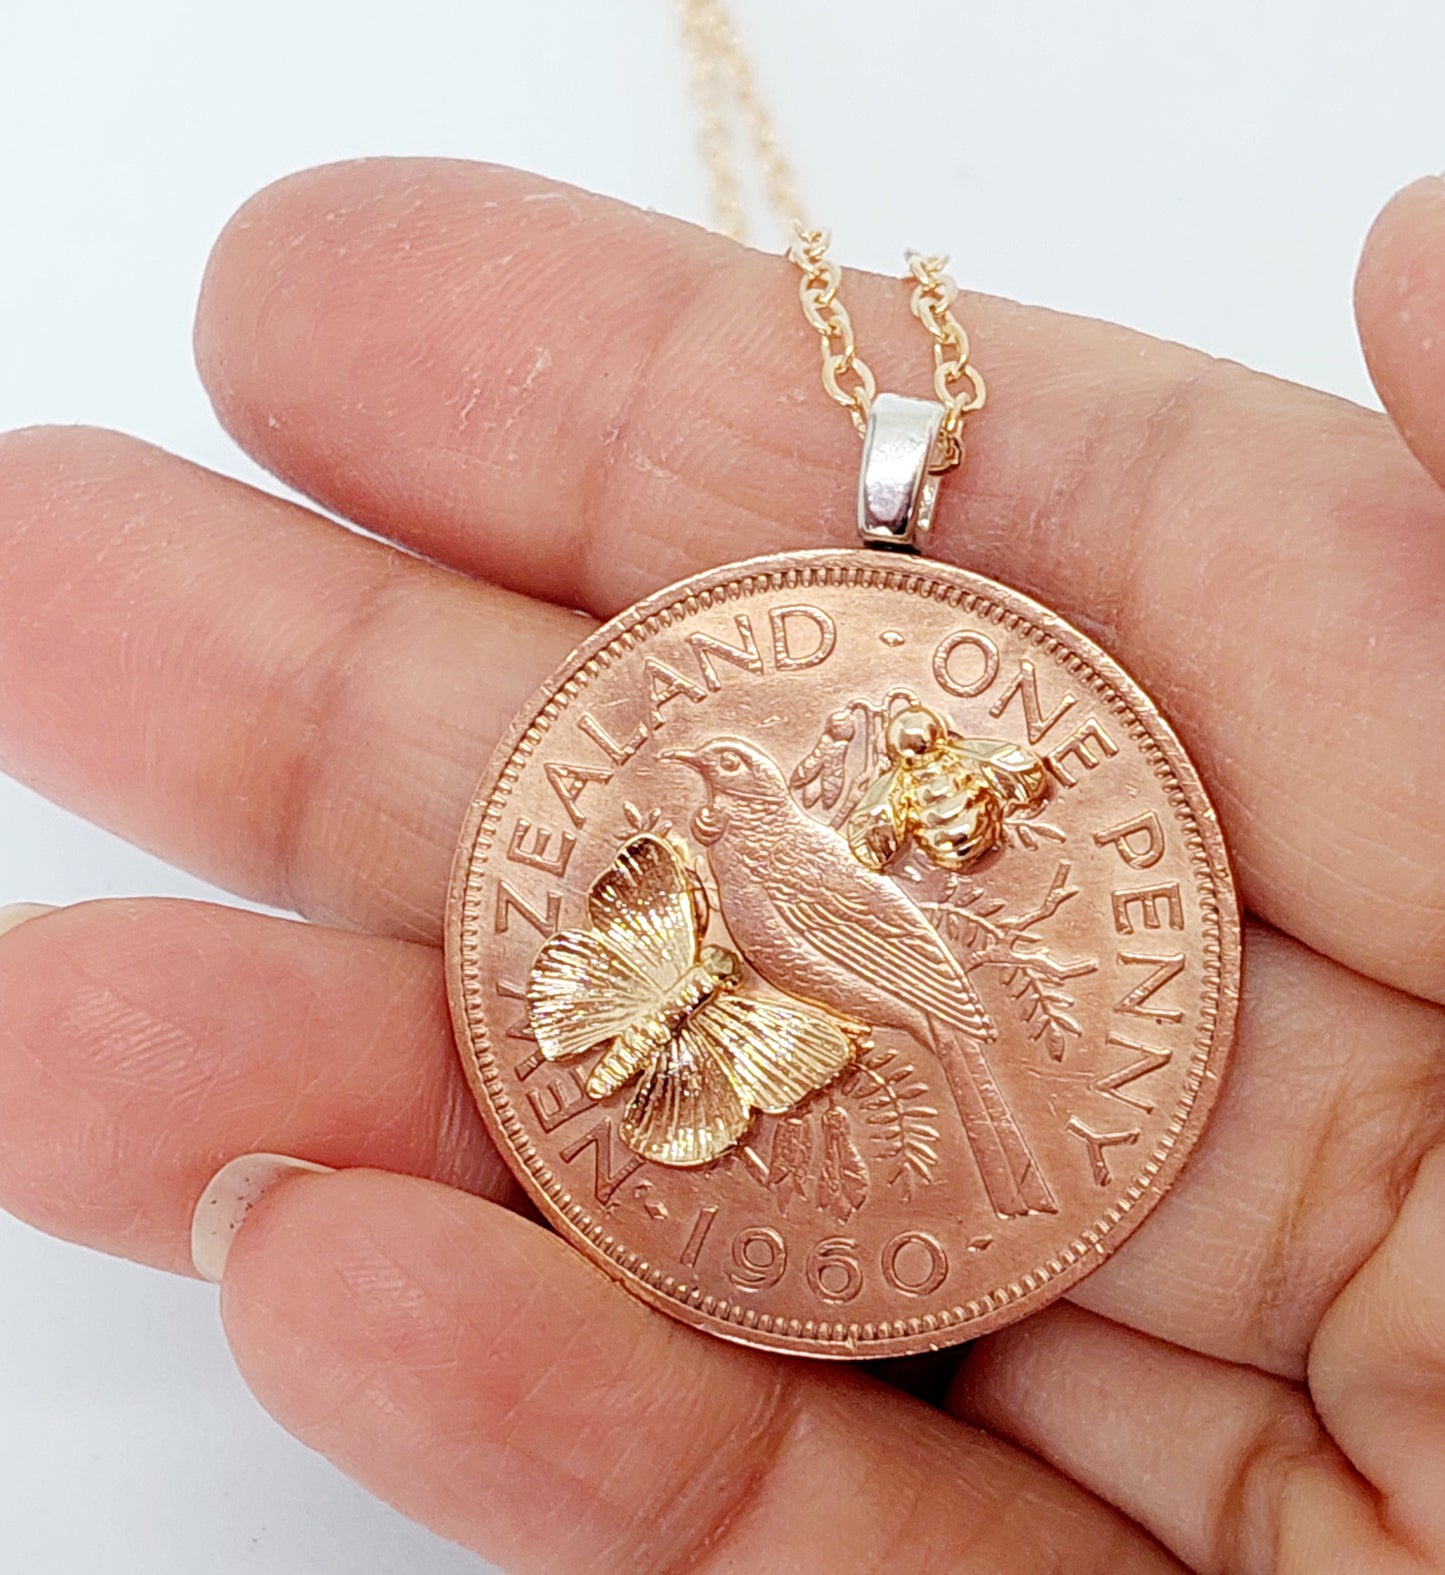 NEW!! Re-minted One Penny Pendant with Golden Butterfly and Bee